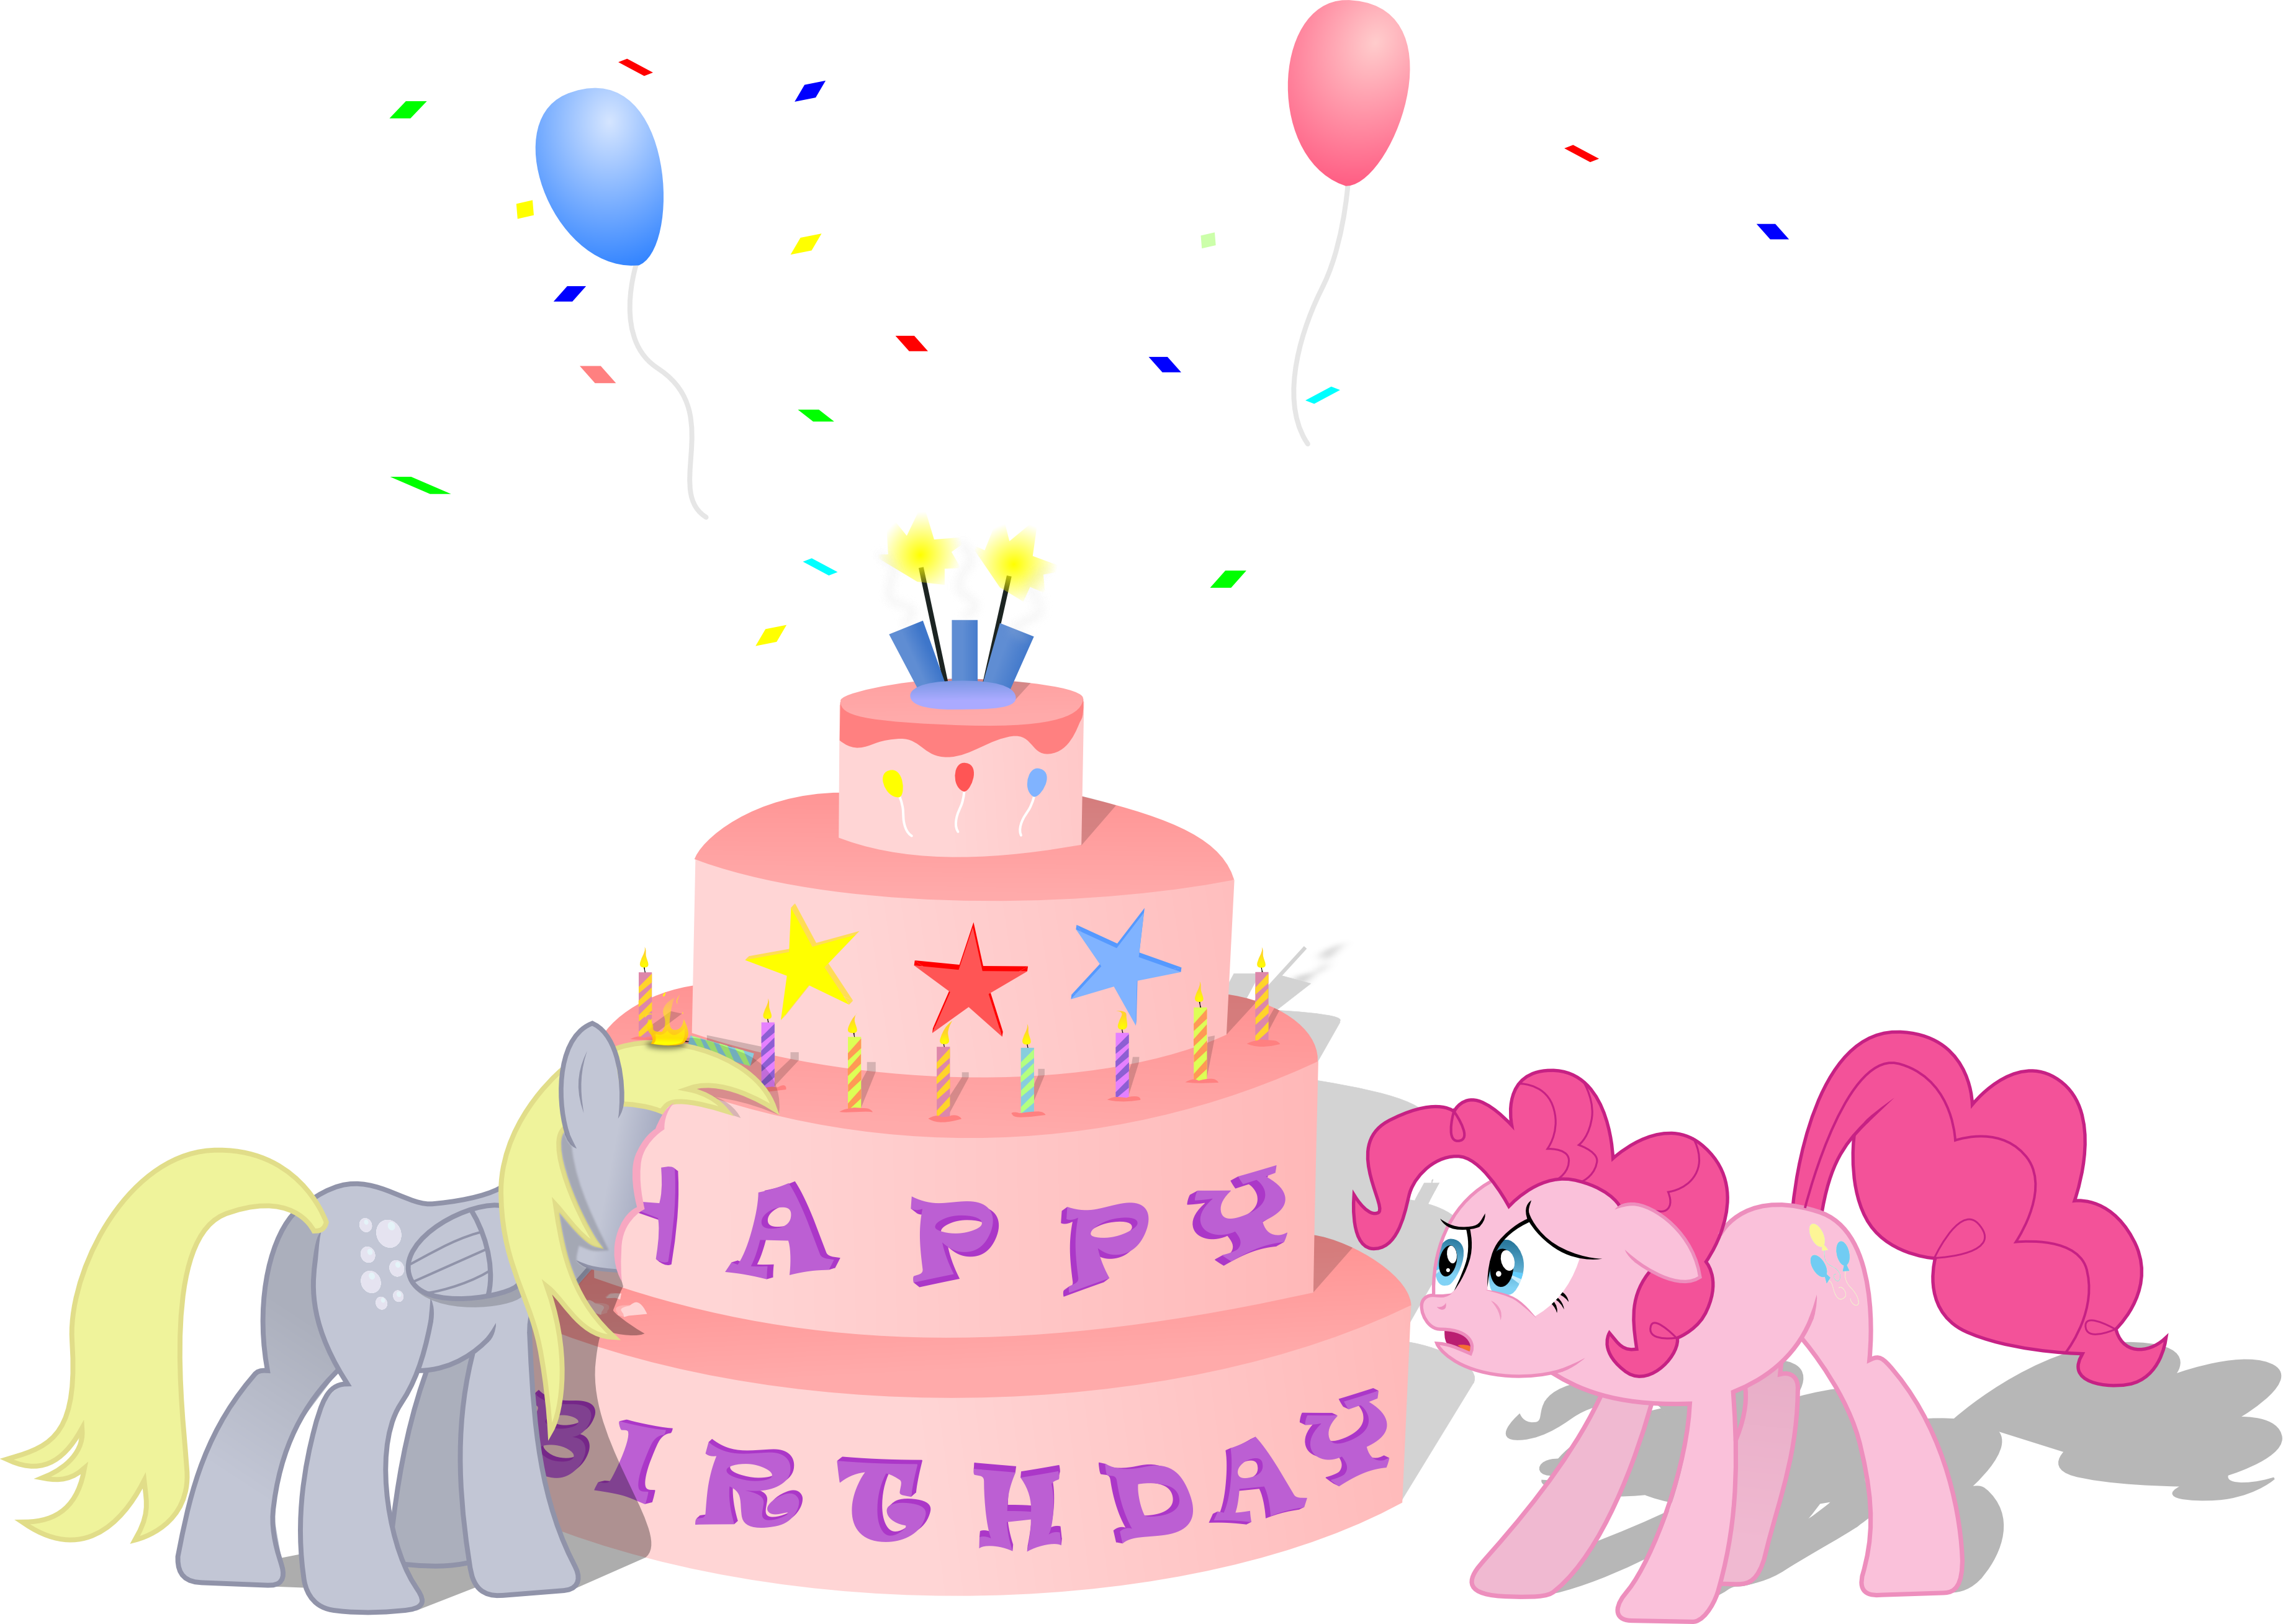 A Cartoon Of A Pink Cake With A Pink Horse And A Pink Pony